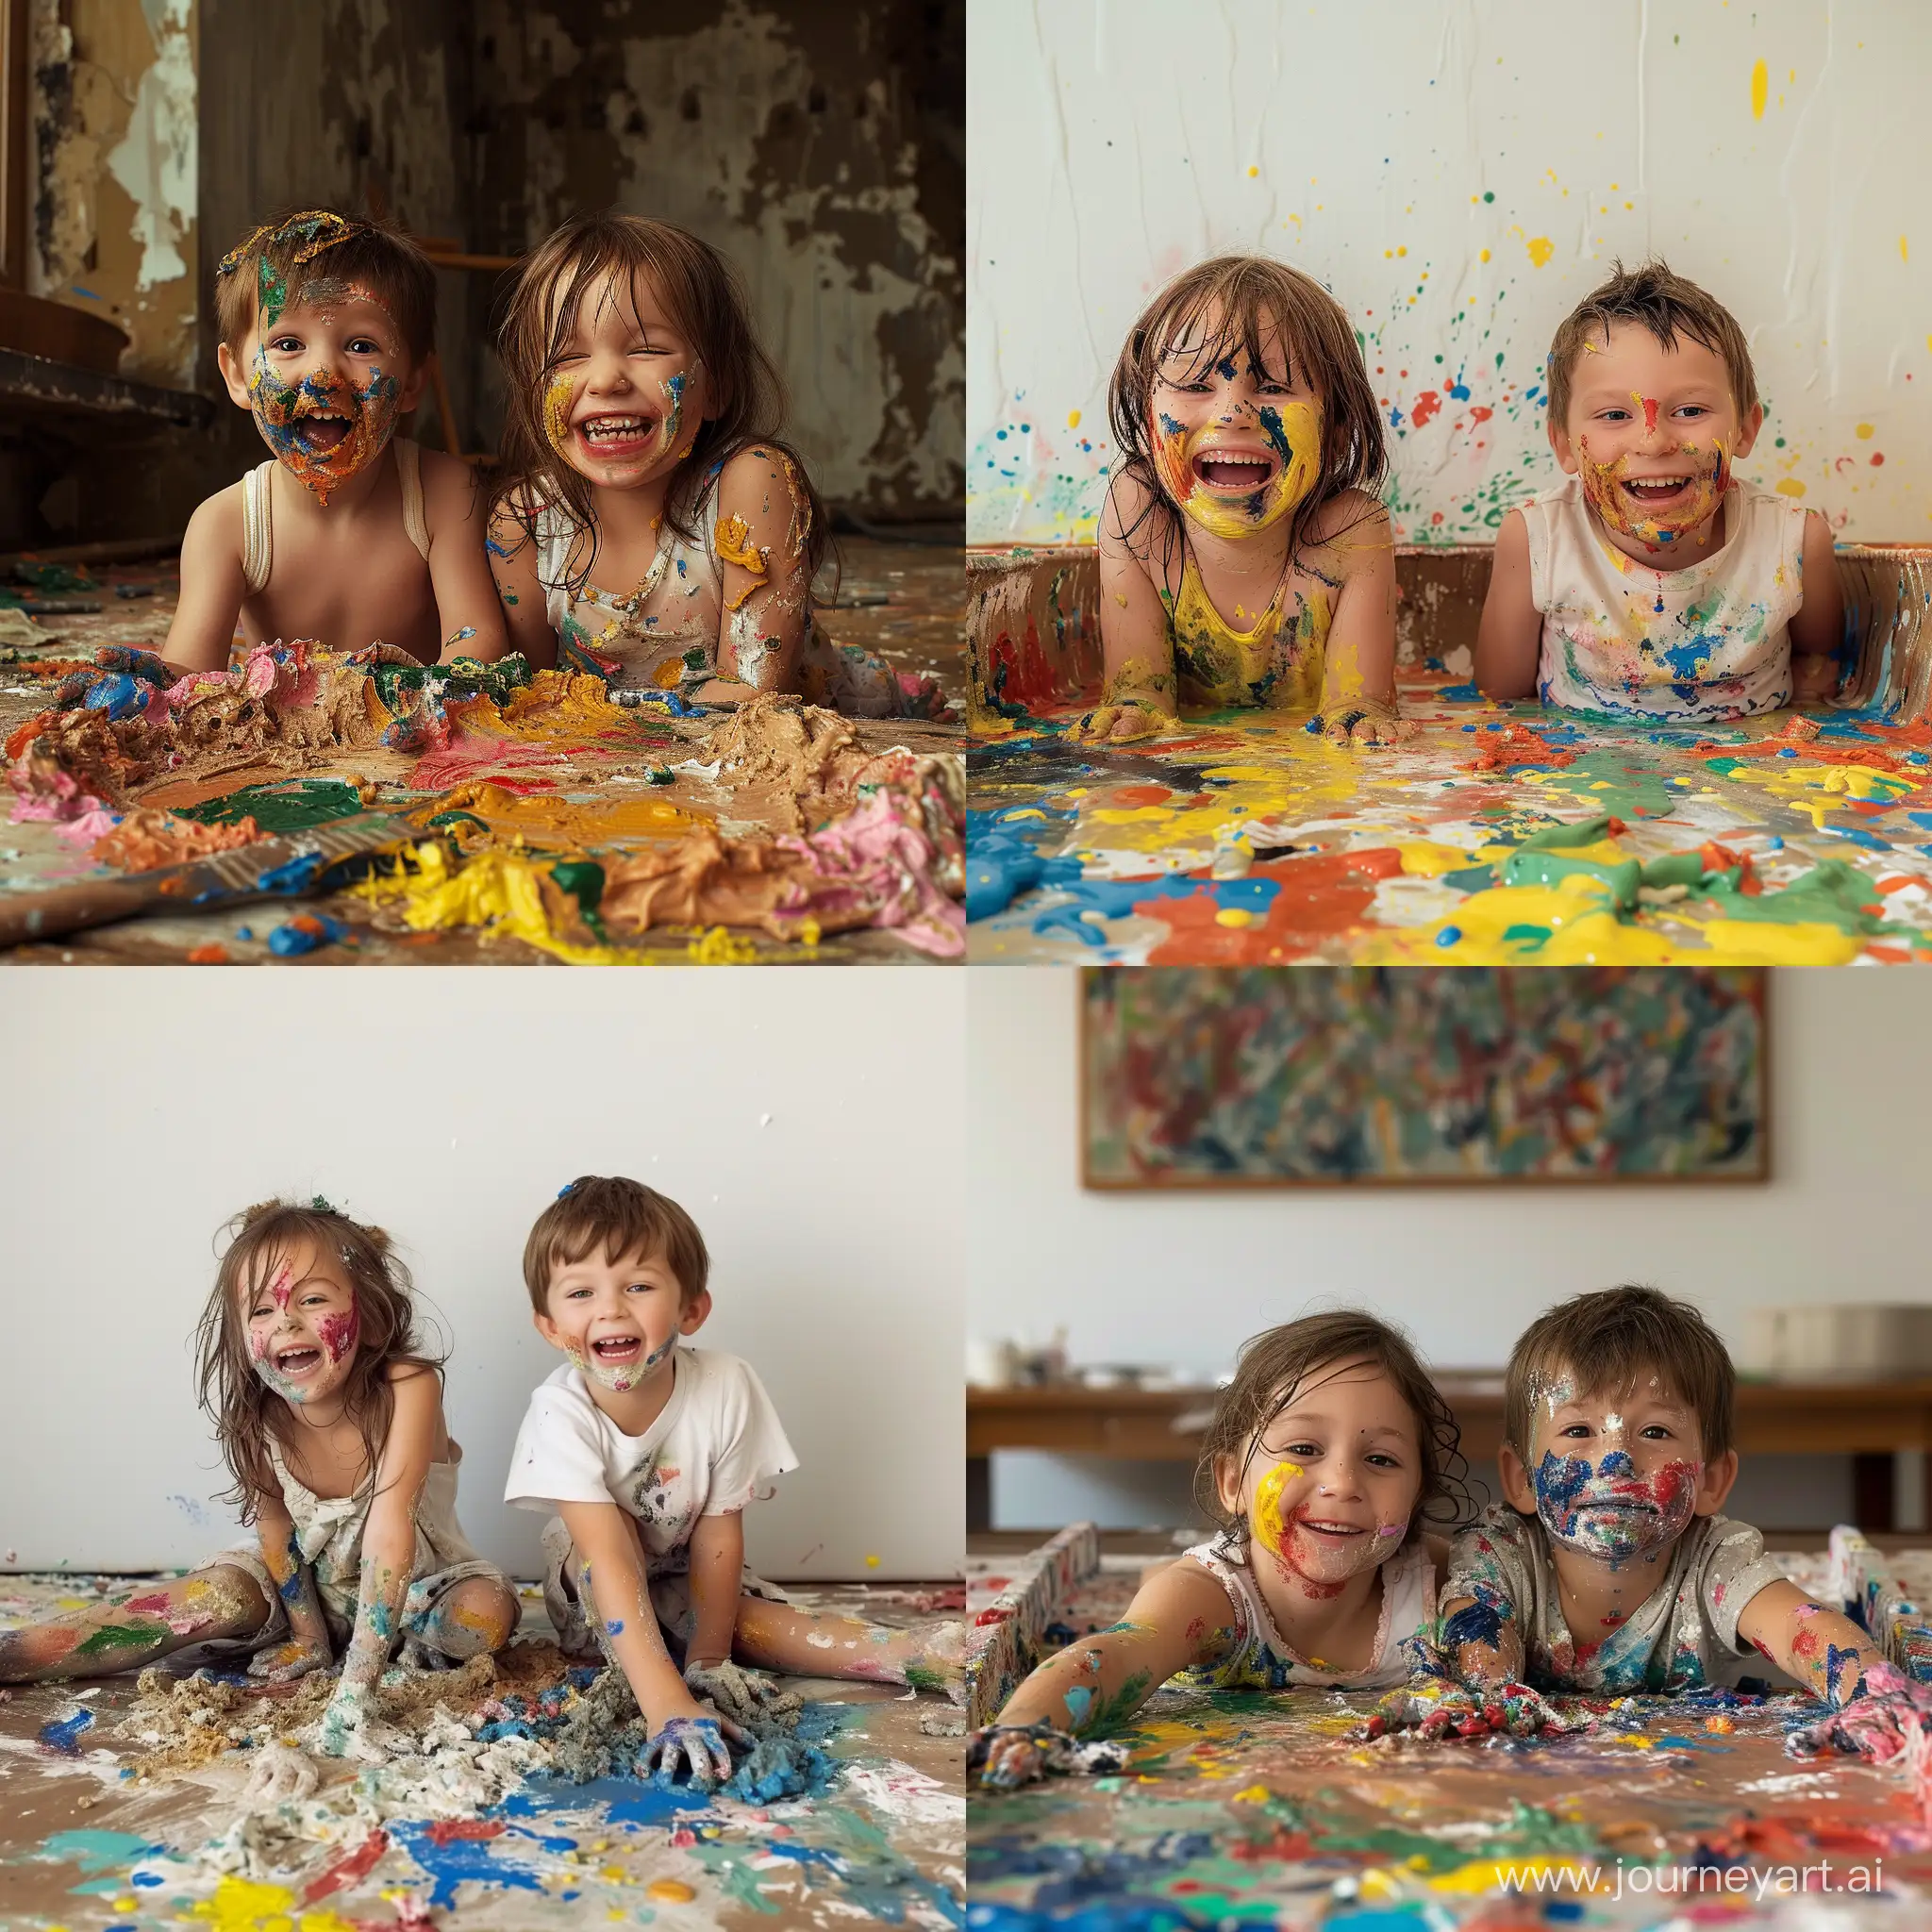 Playful-Kids-Covered-in-Vibrant-Construction-Paint-Apartment-Renovation-Joy